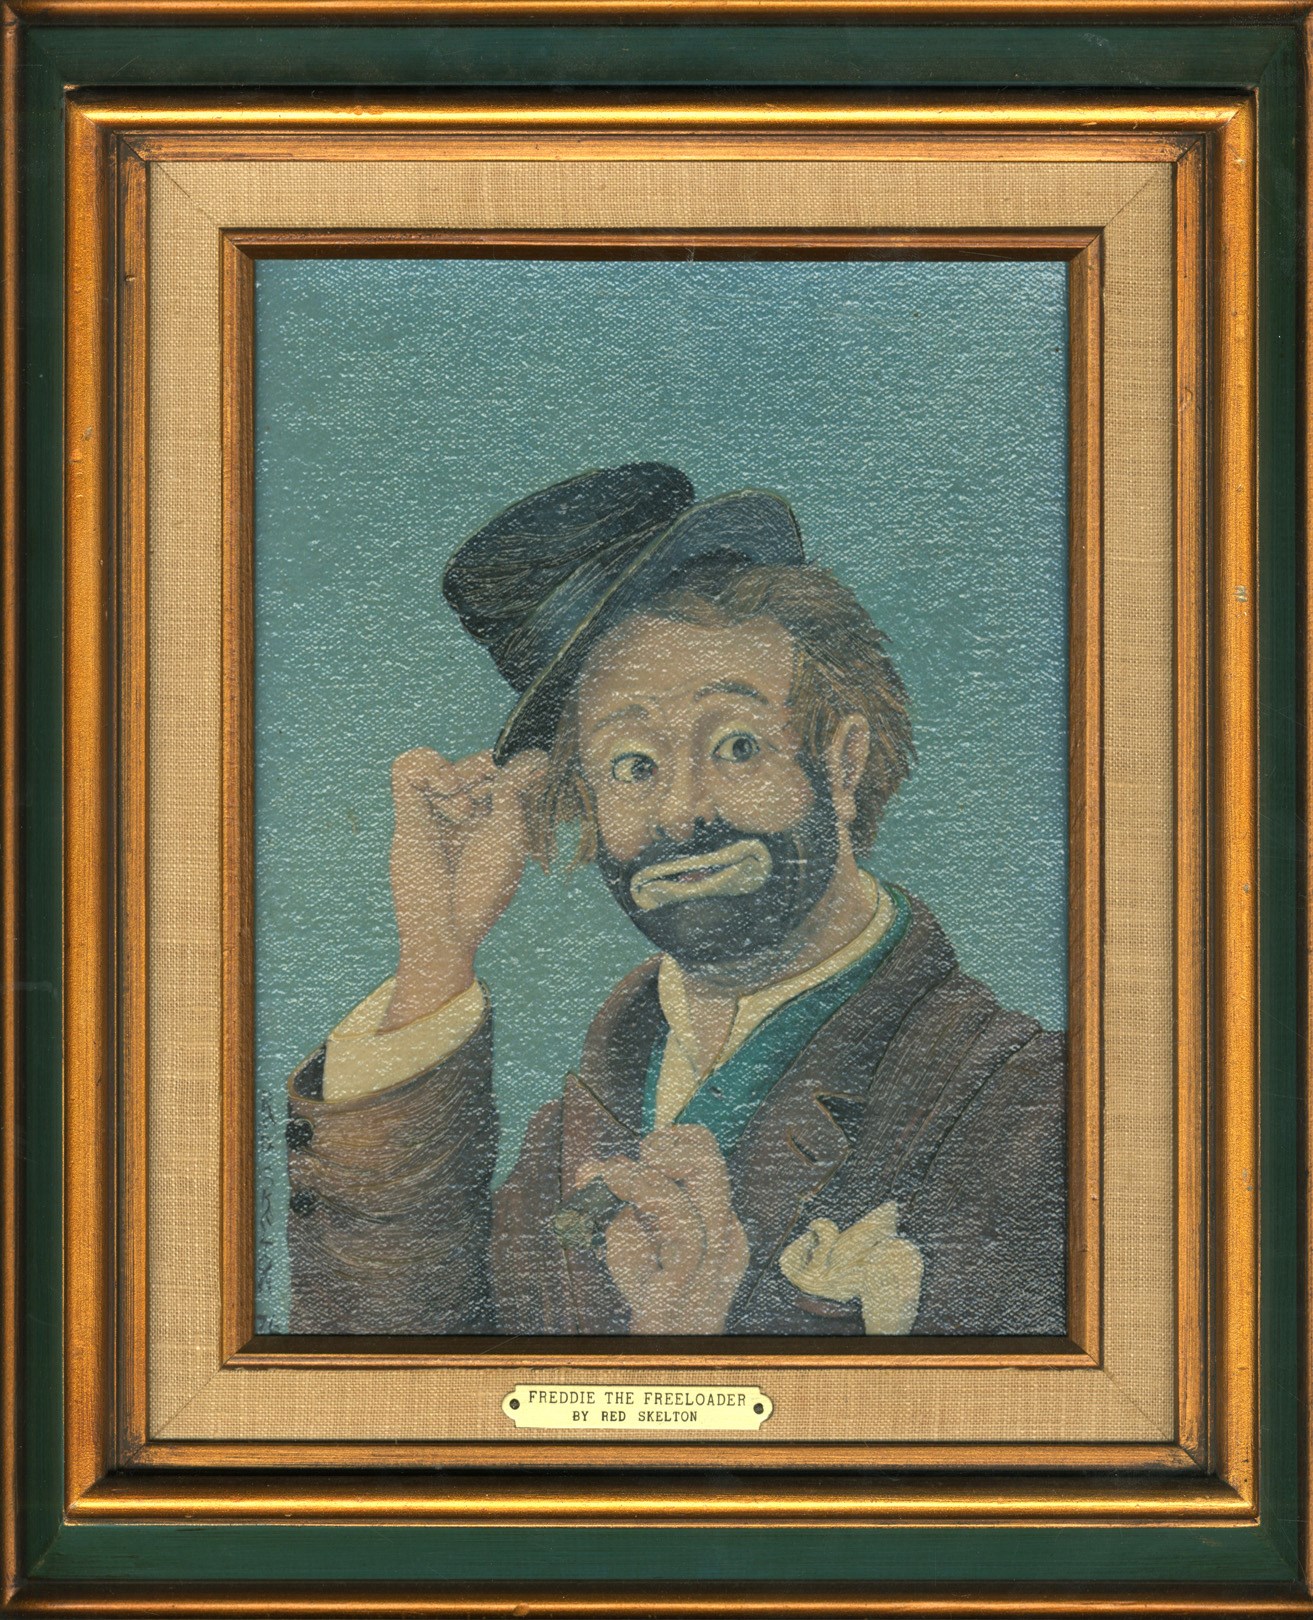 The Emmett Kelly Collection - "Freddie the Freeloader" Painting by Red Skelton, Gifted to Emmett Kelly